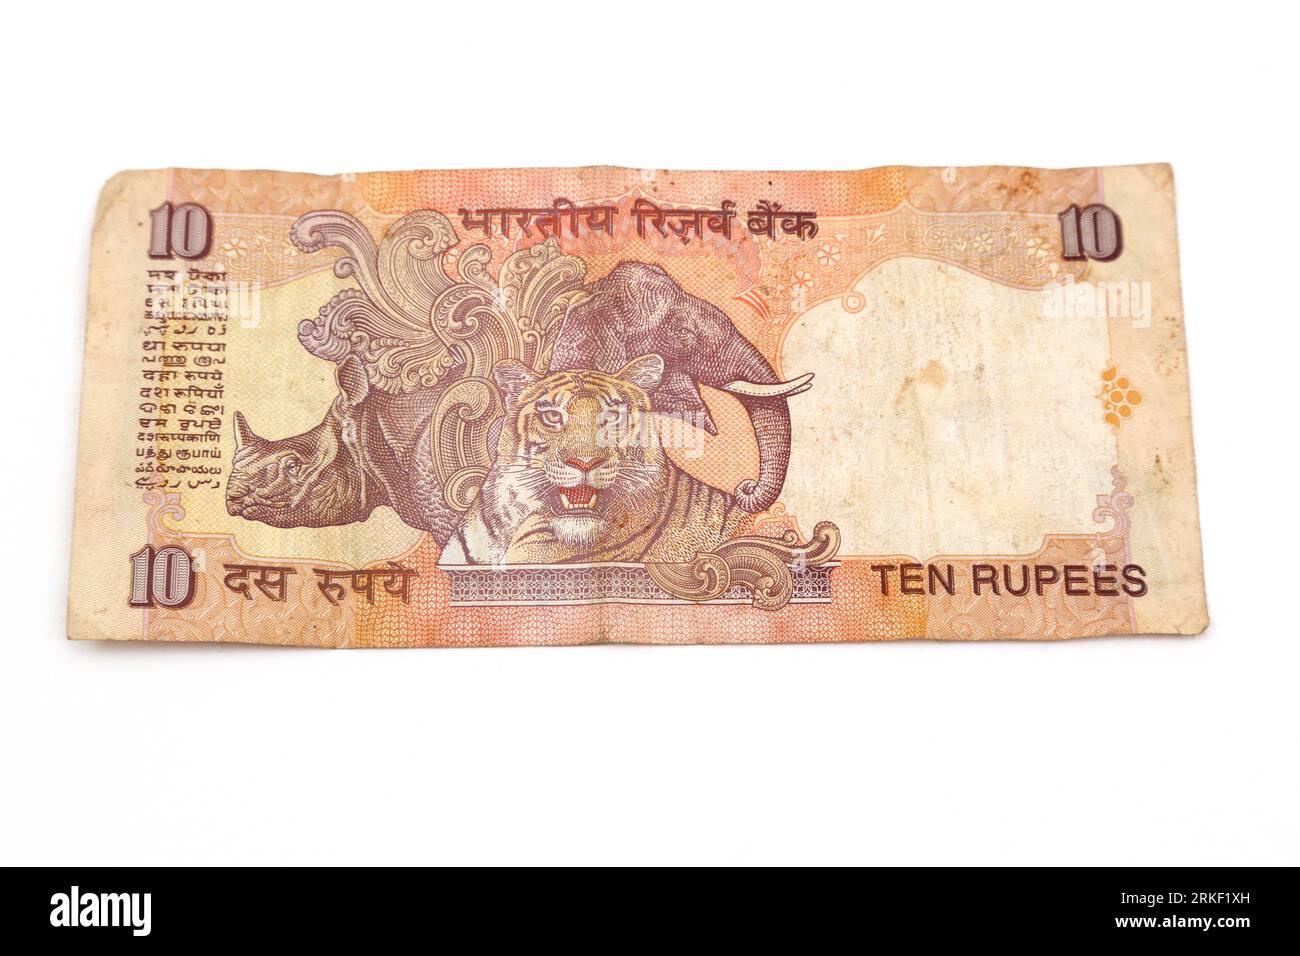 Reserve Bank of India Mahatma Gandhi Series 10 Rupees Banknote Reverse Showing Indian Rhinoceros, Elephant and Bengal Tiger Issued 1996-Current Stock Photo